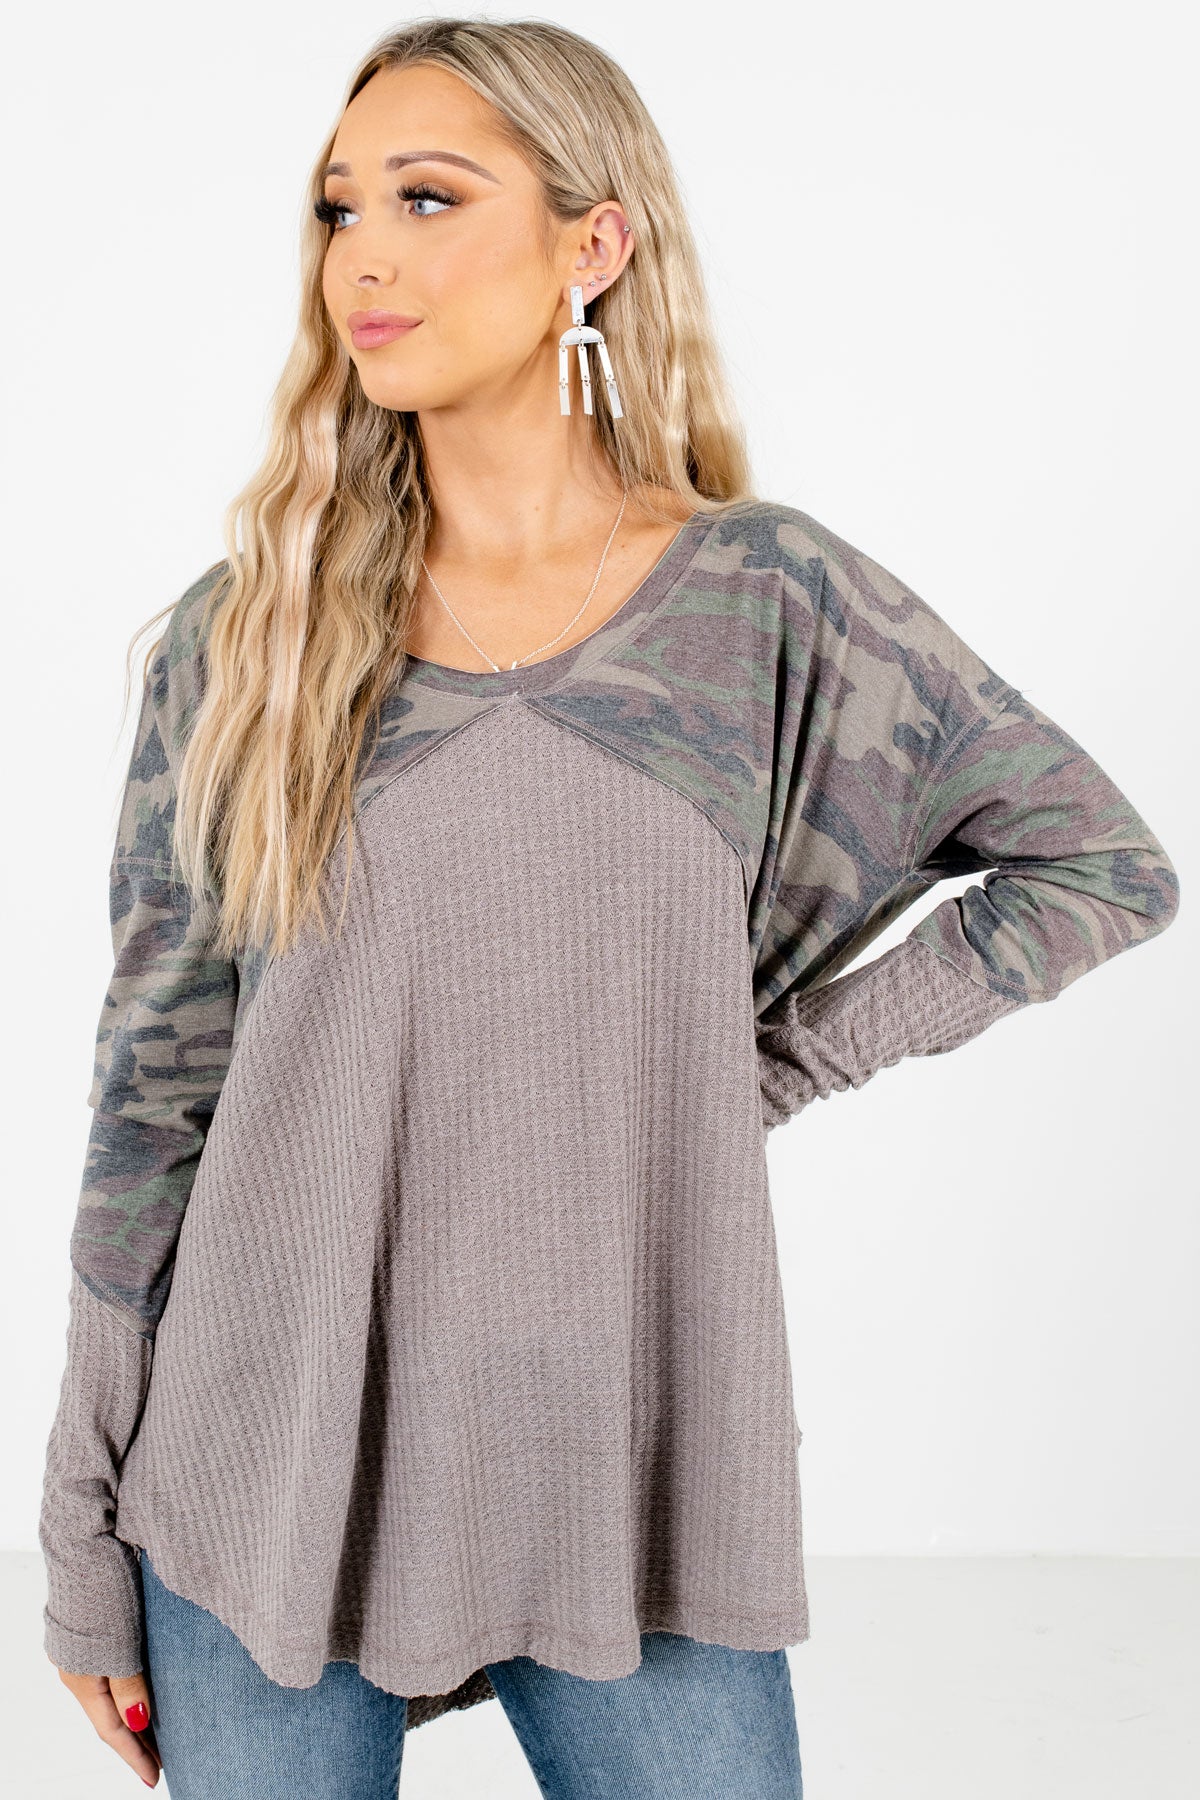 Gray and Green Camo Print Boutique Tops for Women